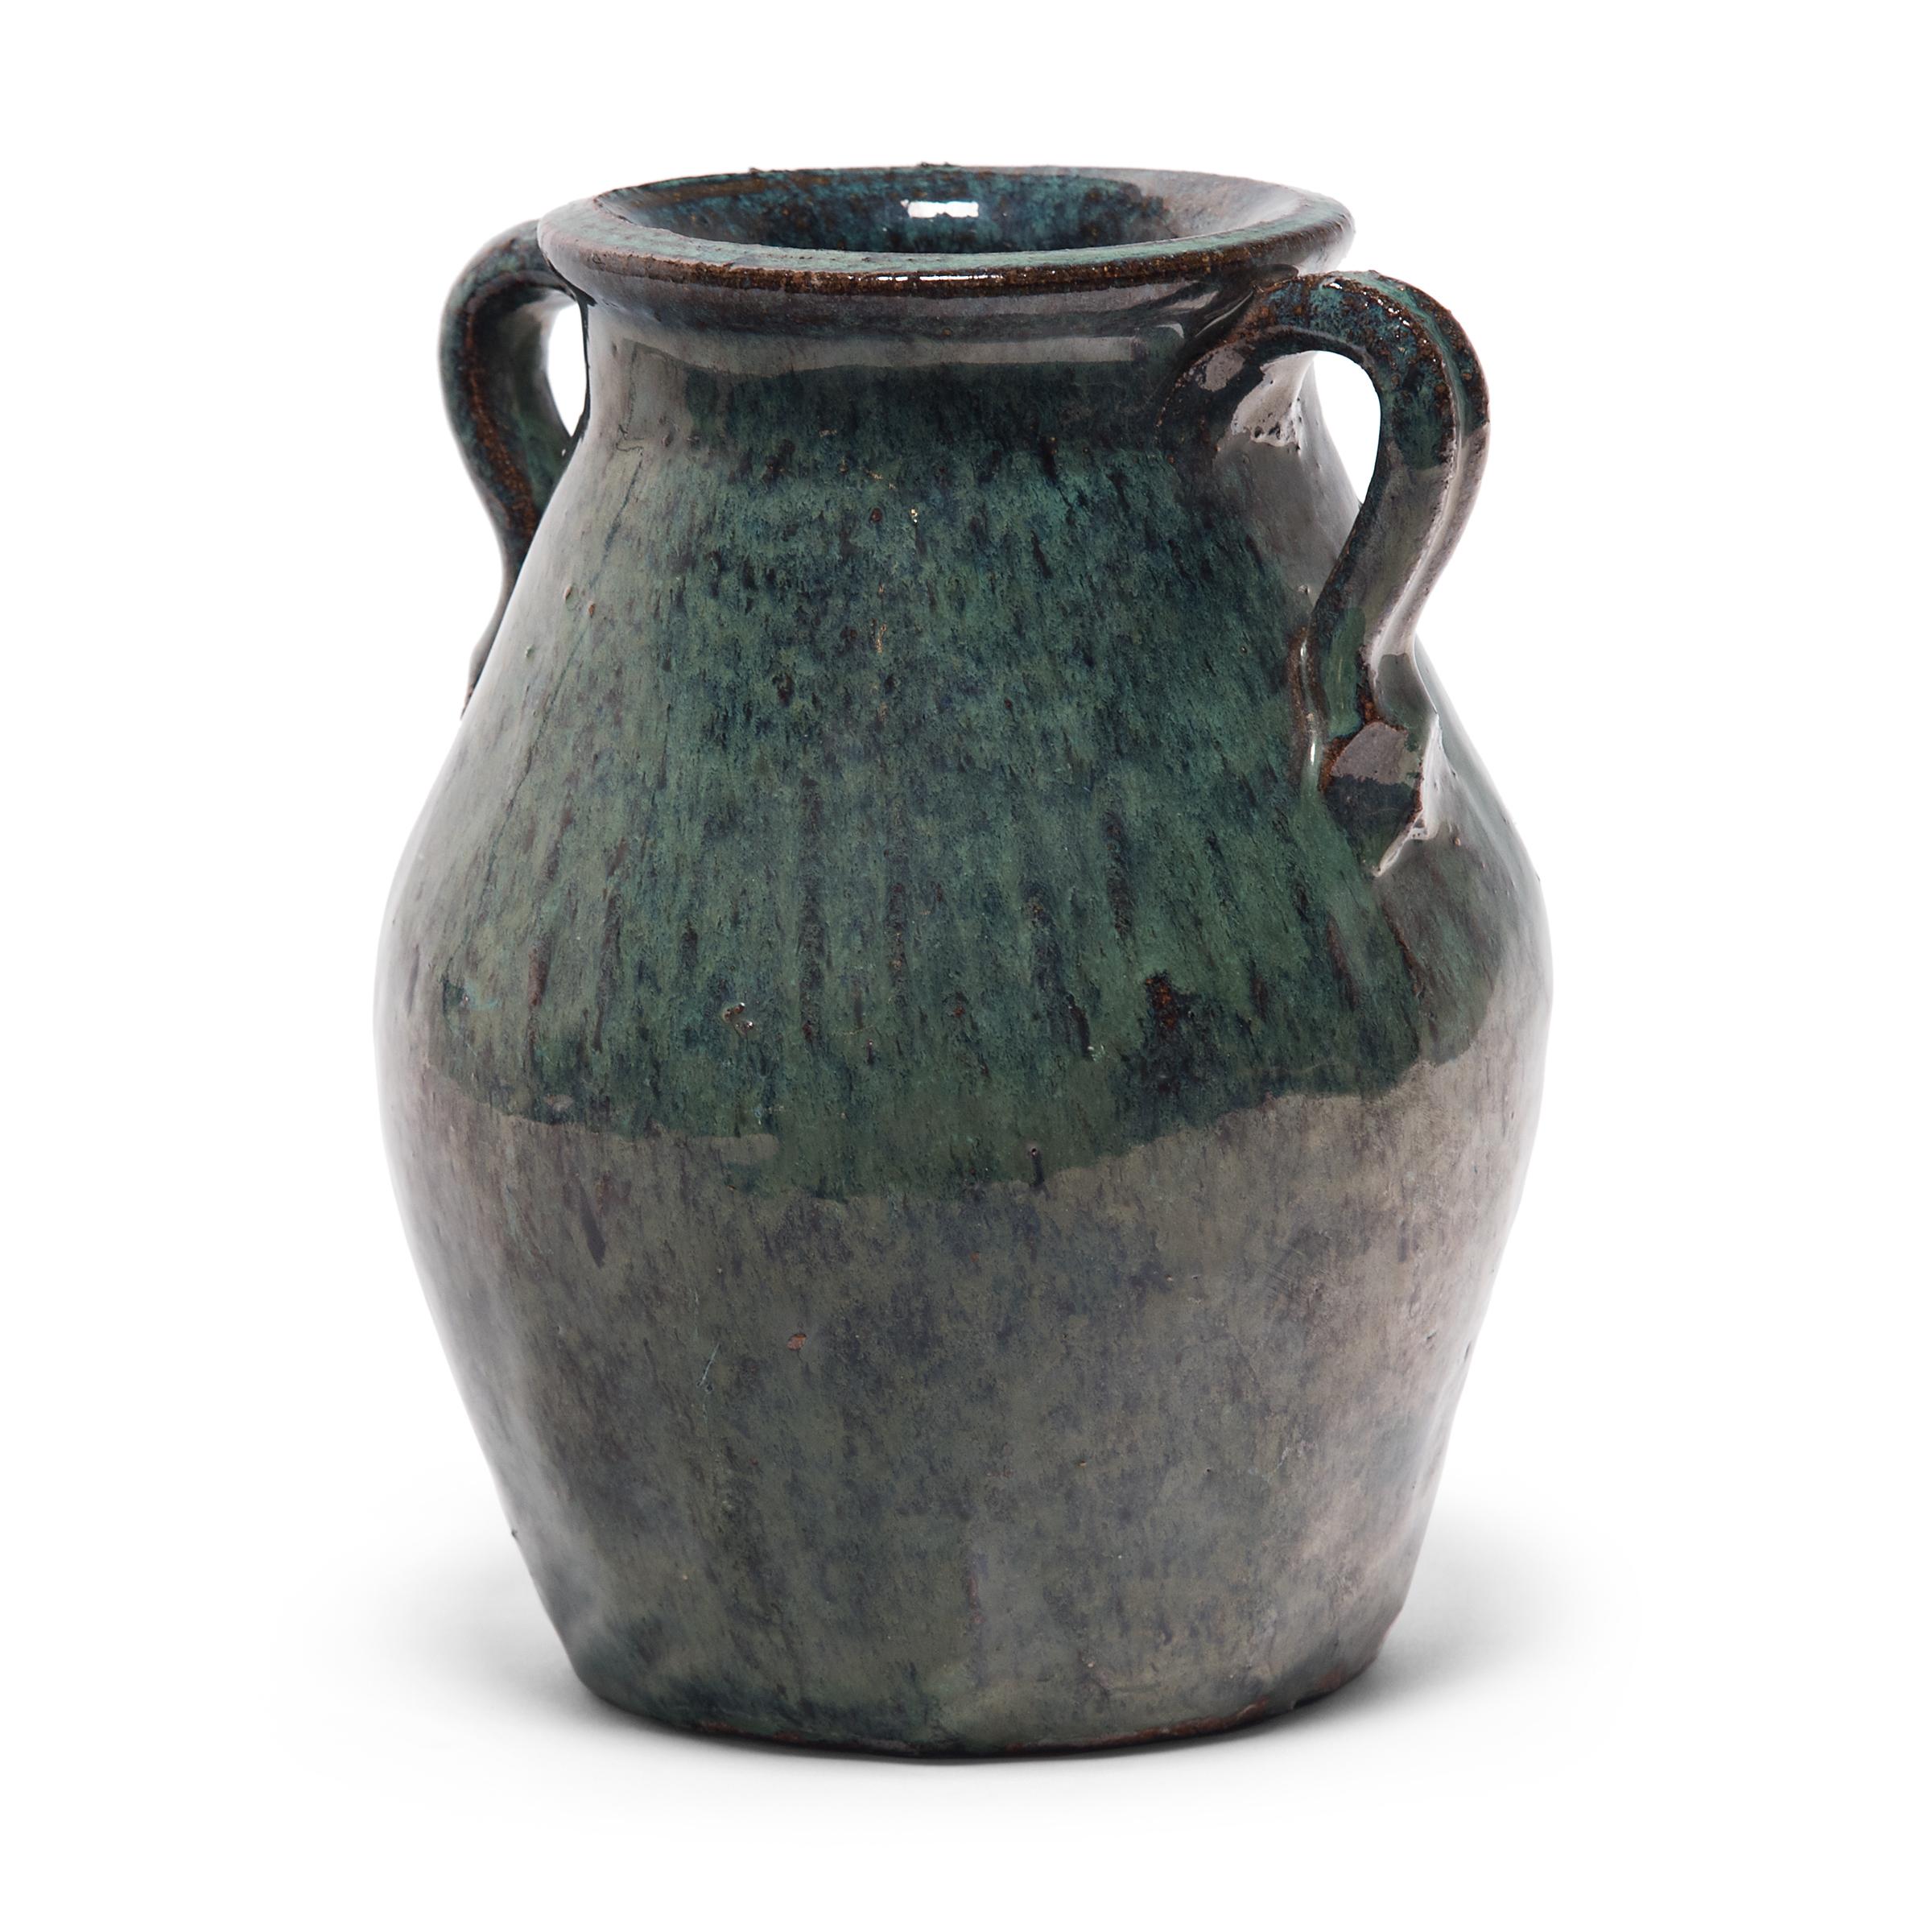 A luminous blue-green glaze sheets, pools and drips down the surface of this early 20th century kitchen jar. The pear-shaped jar has a tapered body and a wide flared mouth framed by simple strap handles. The monochrome jade green glaze exhibits a